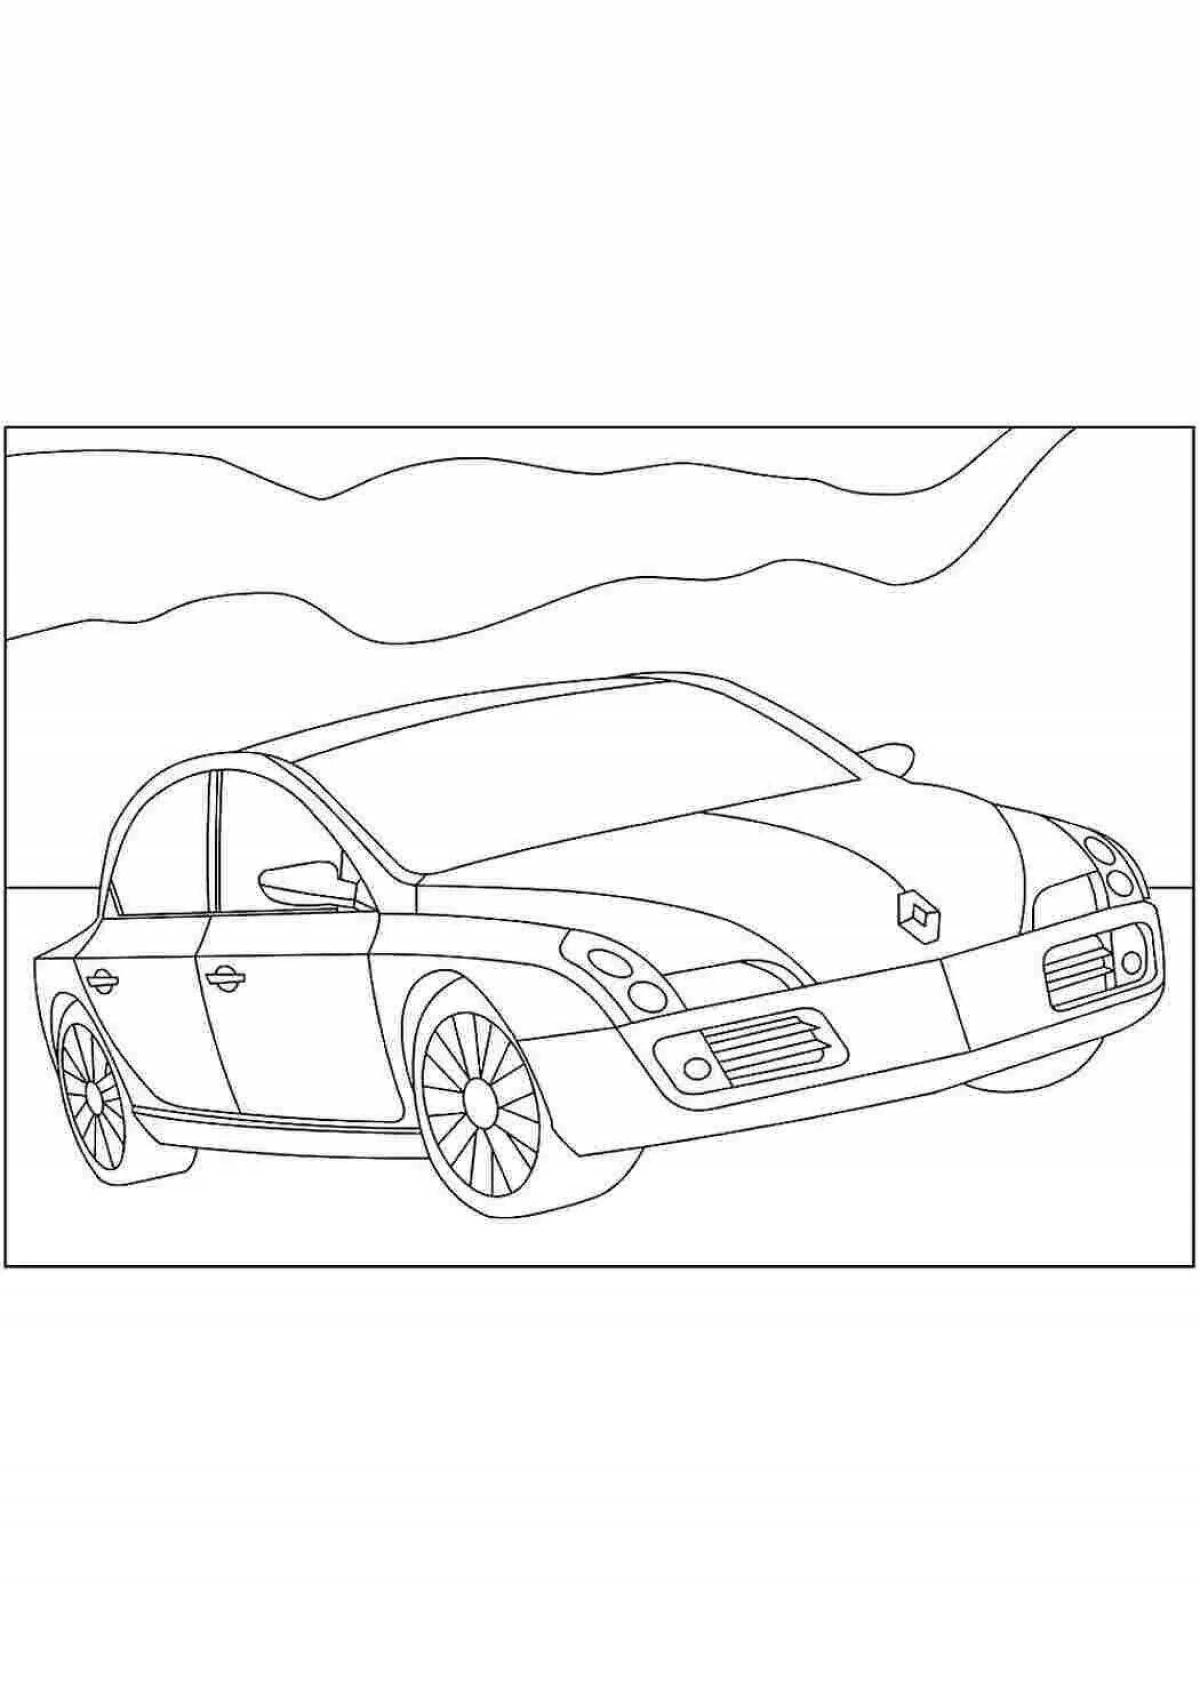 Coloring page awesome renault car